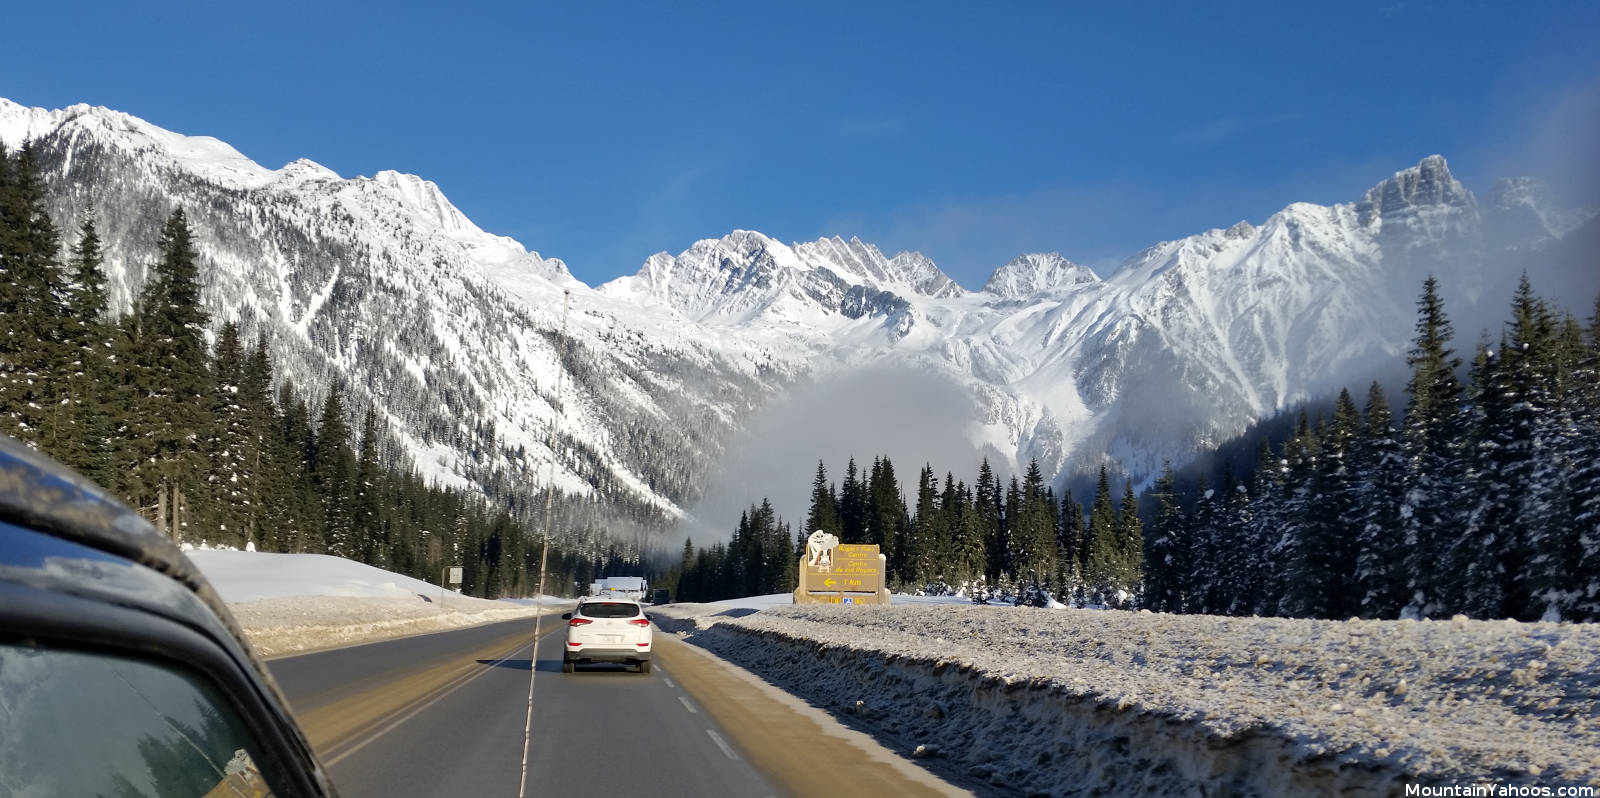 Travelling on the Trans-Canada Highway between Revelstoke and Golden British Columbia